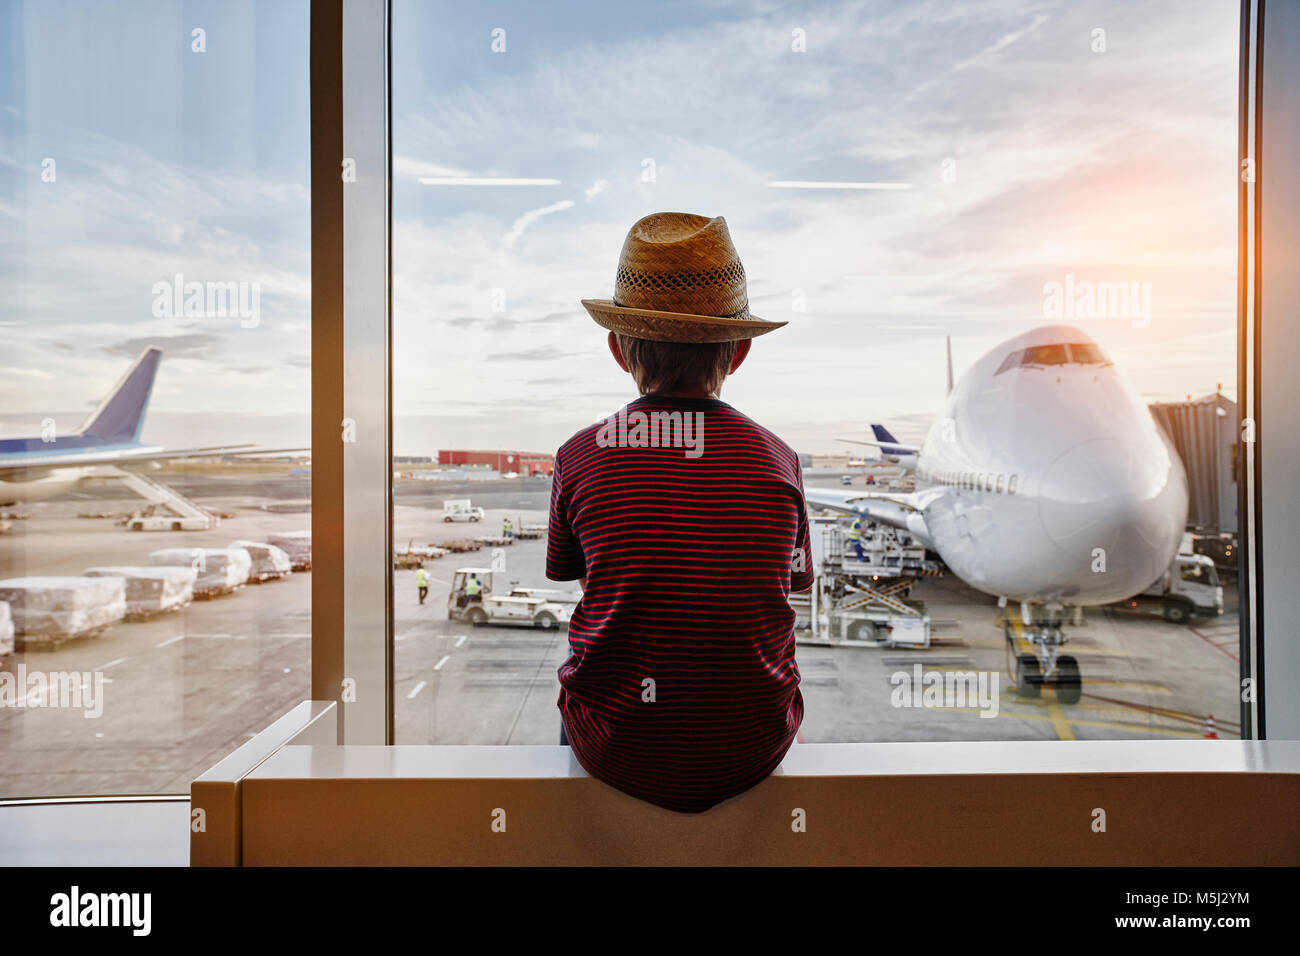 Boy wearing straw hat looking through window to airplane on the apron Stock Photo